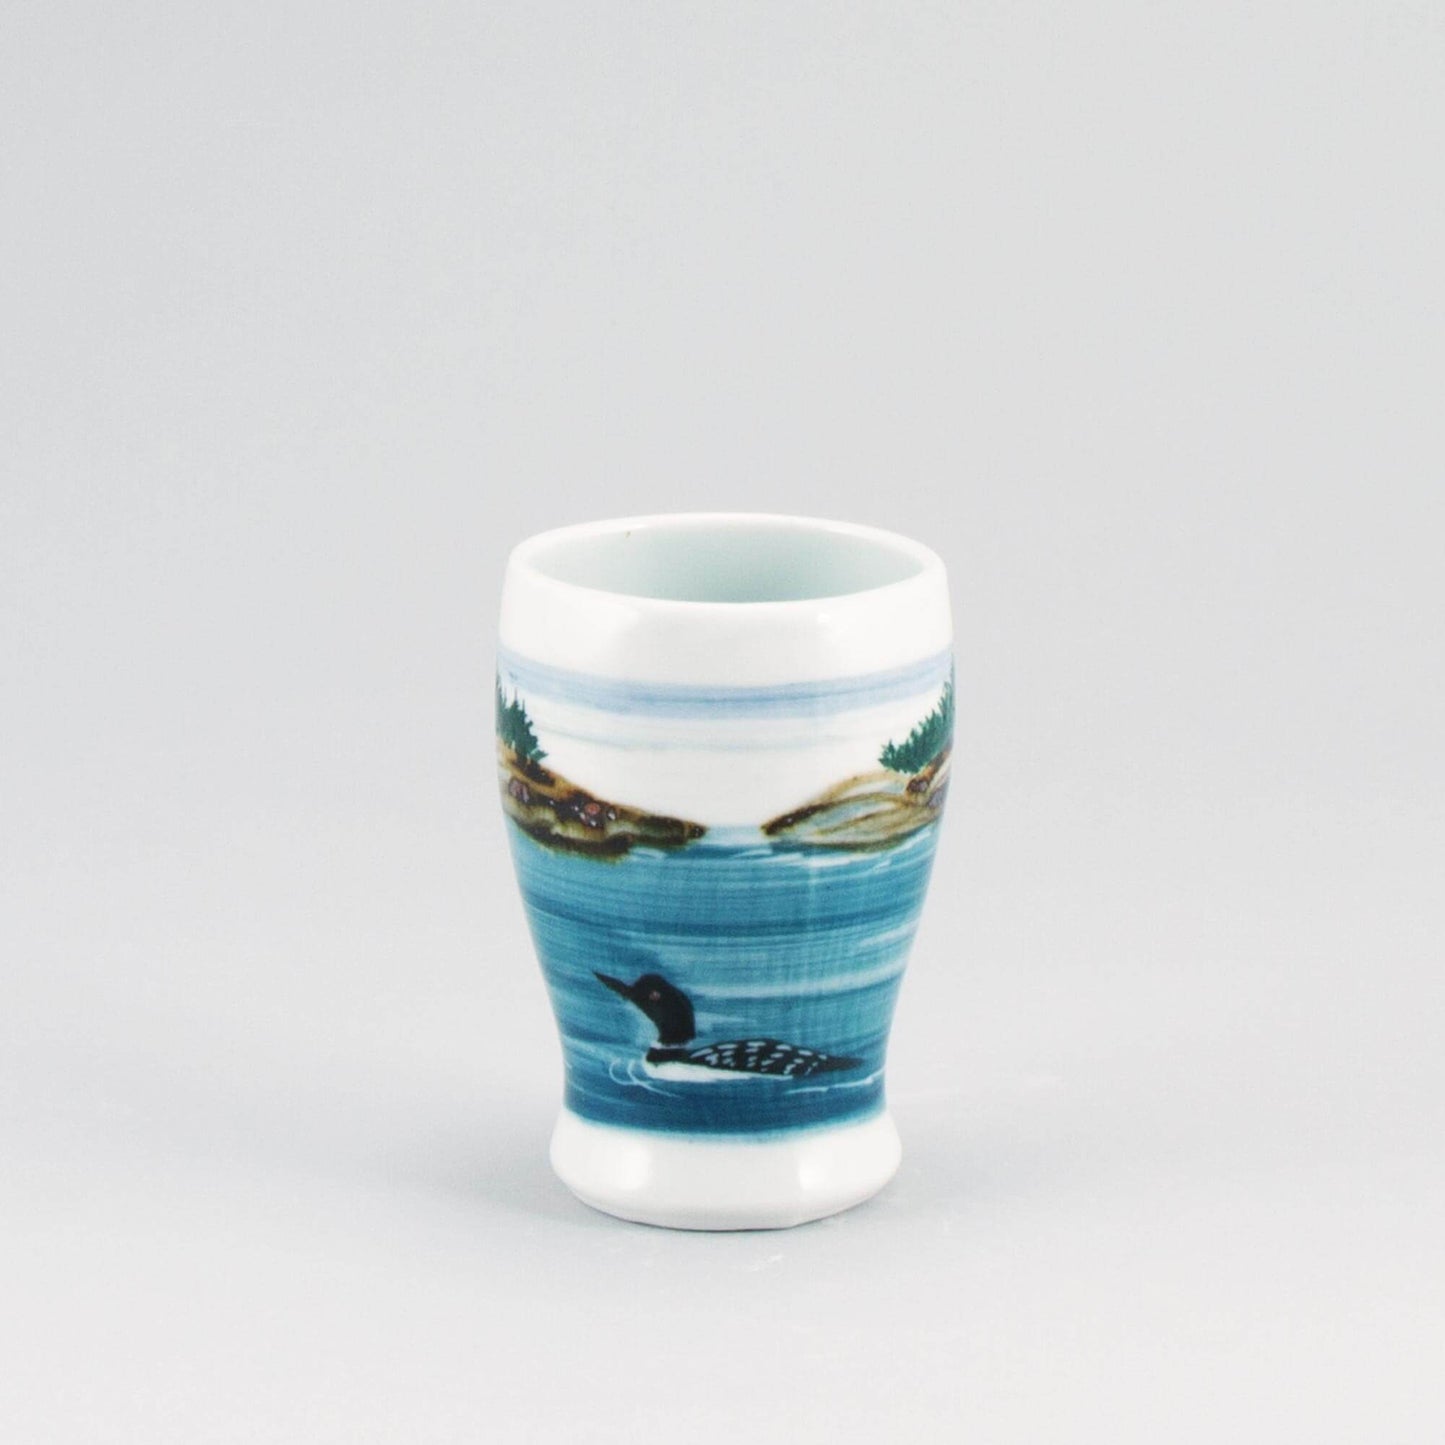 Handmade Pottery Curvy Tumbler in Loon pattern made by Georgetown Pottery in Maine